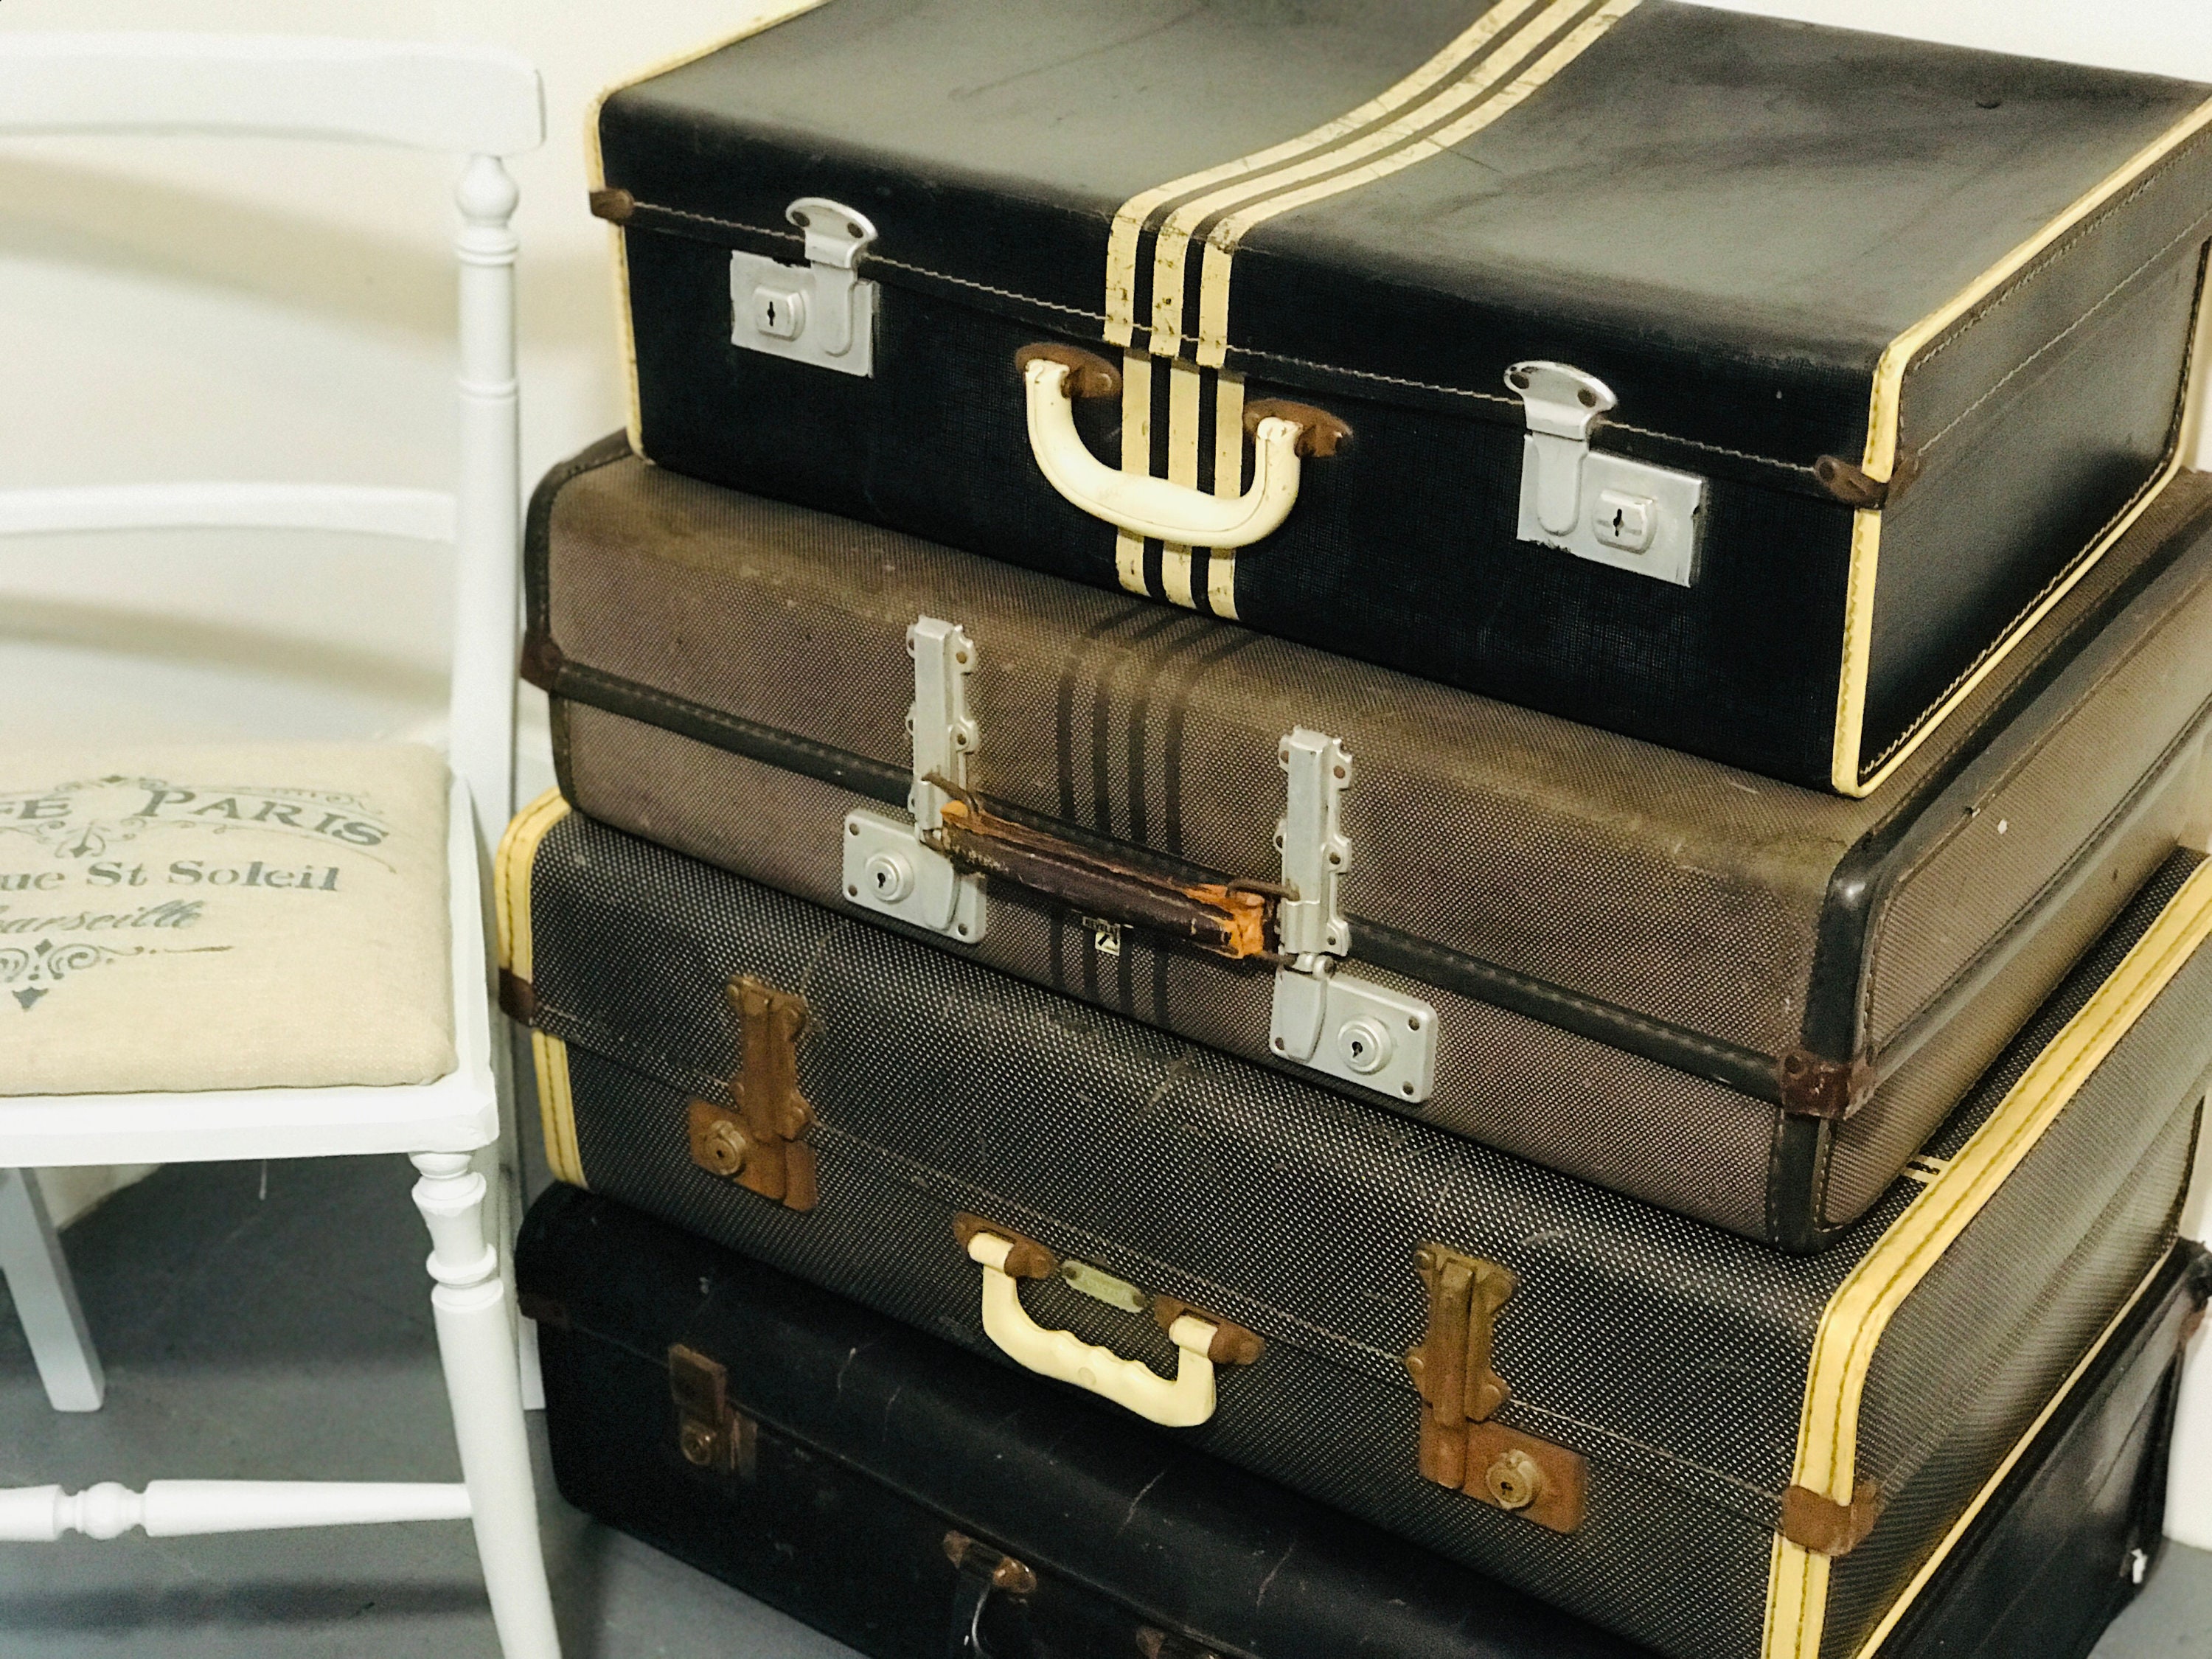 Black And Cream Vintage Luggage Collection For Home